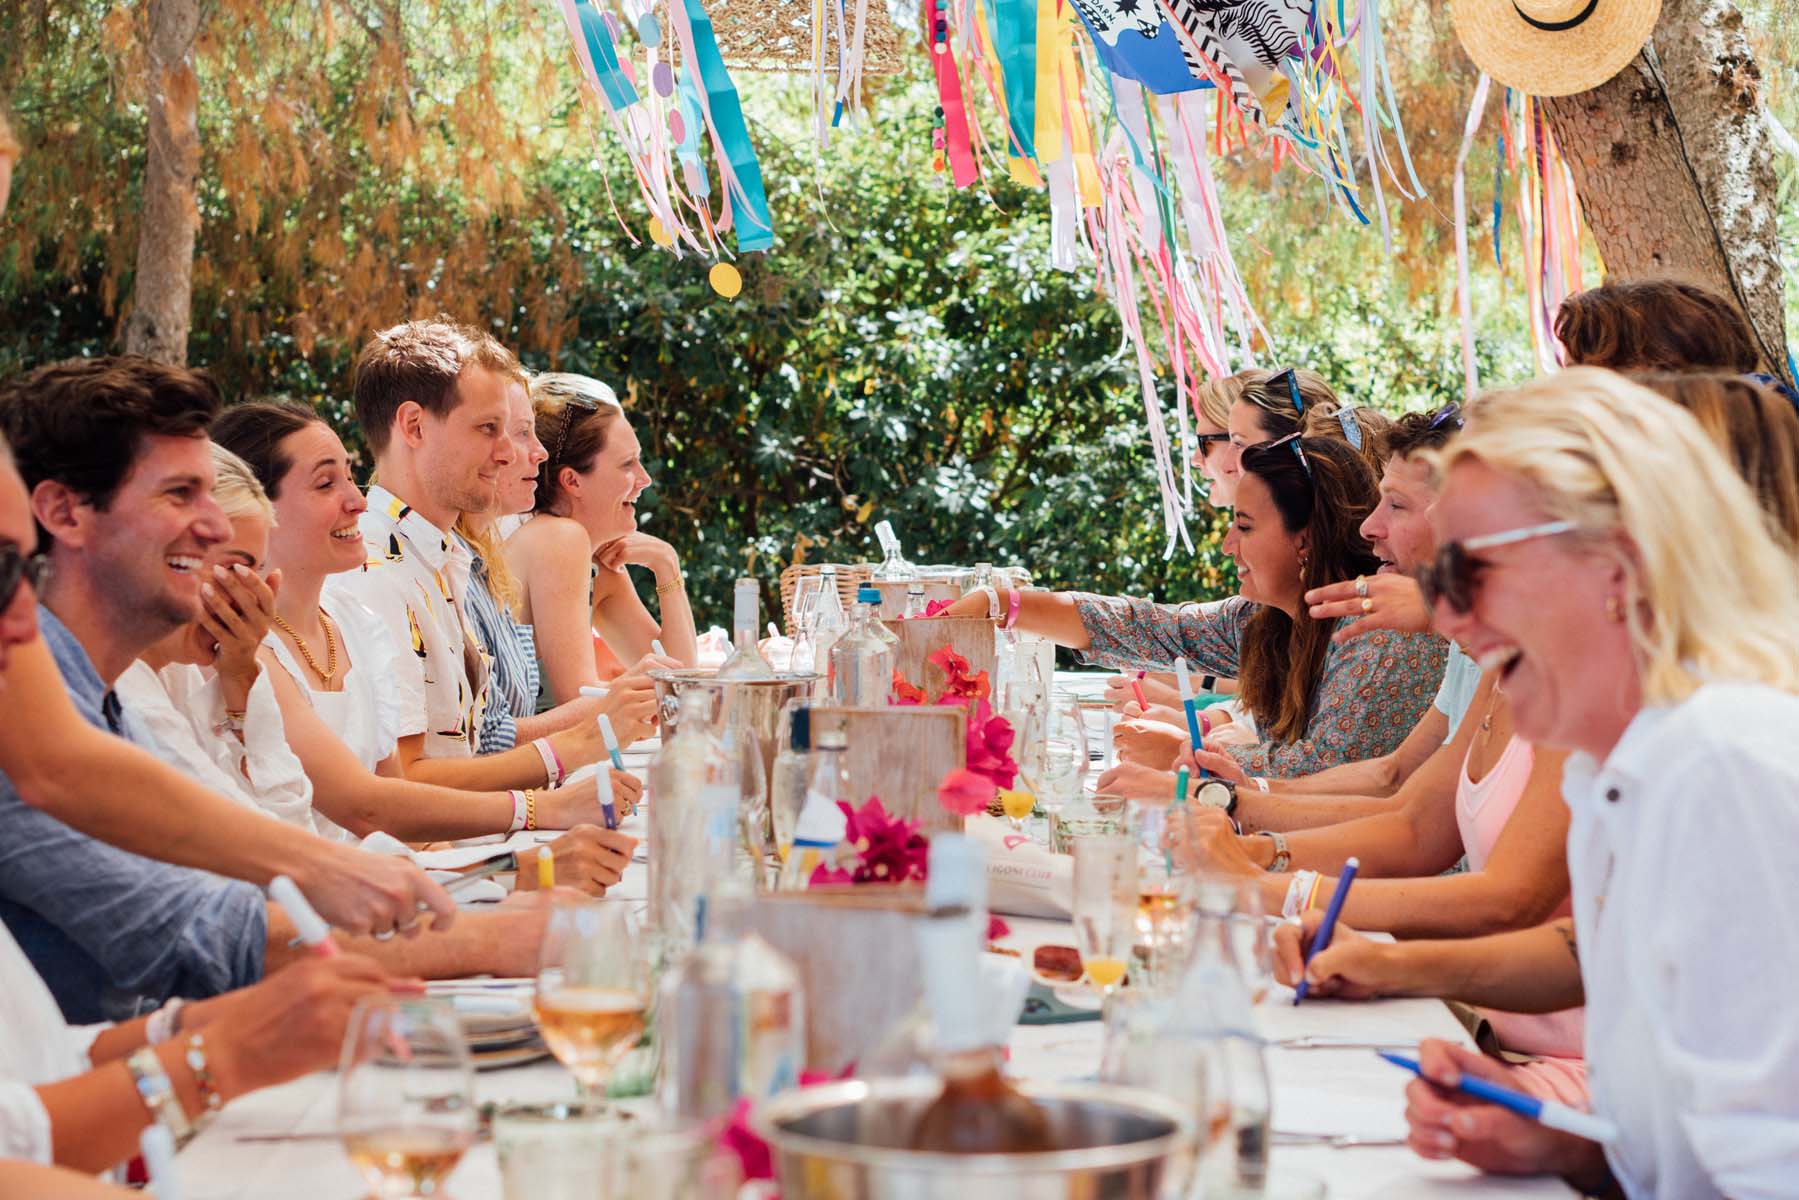 People seated at a long table with summery festival decorations